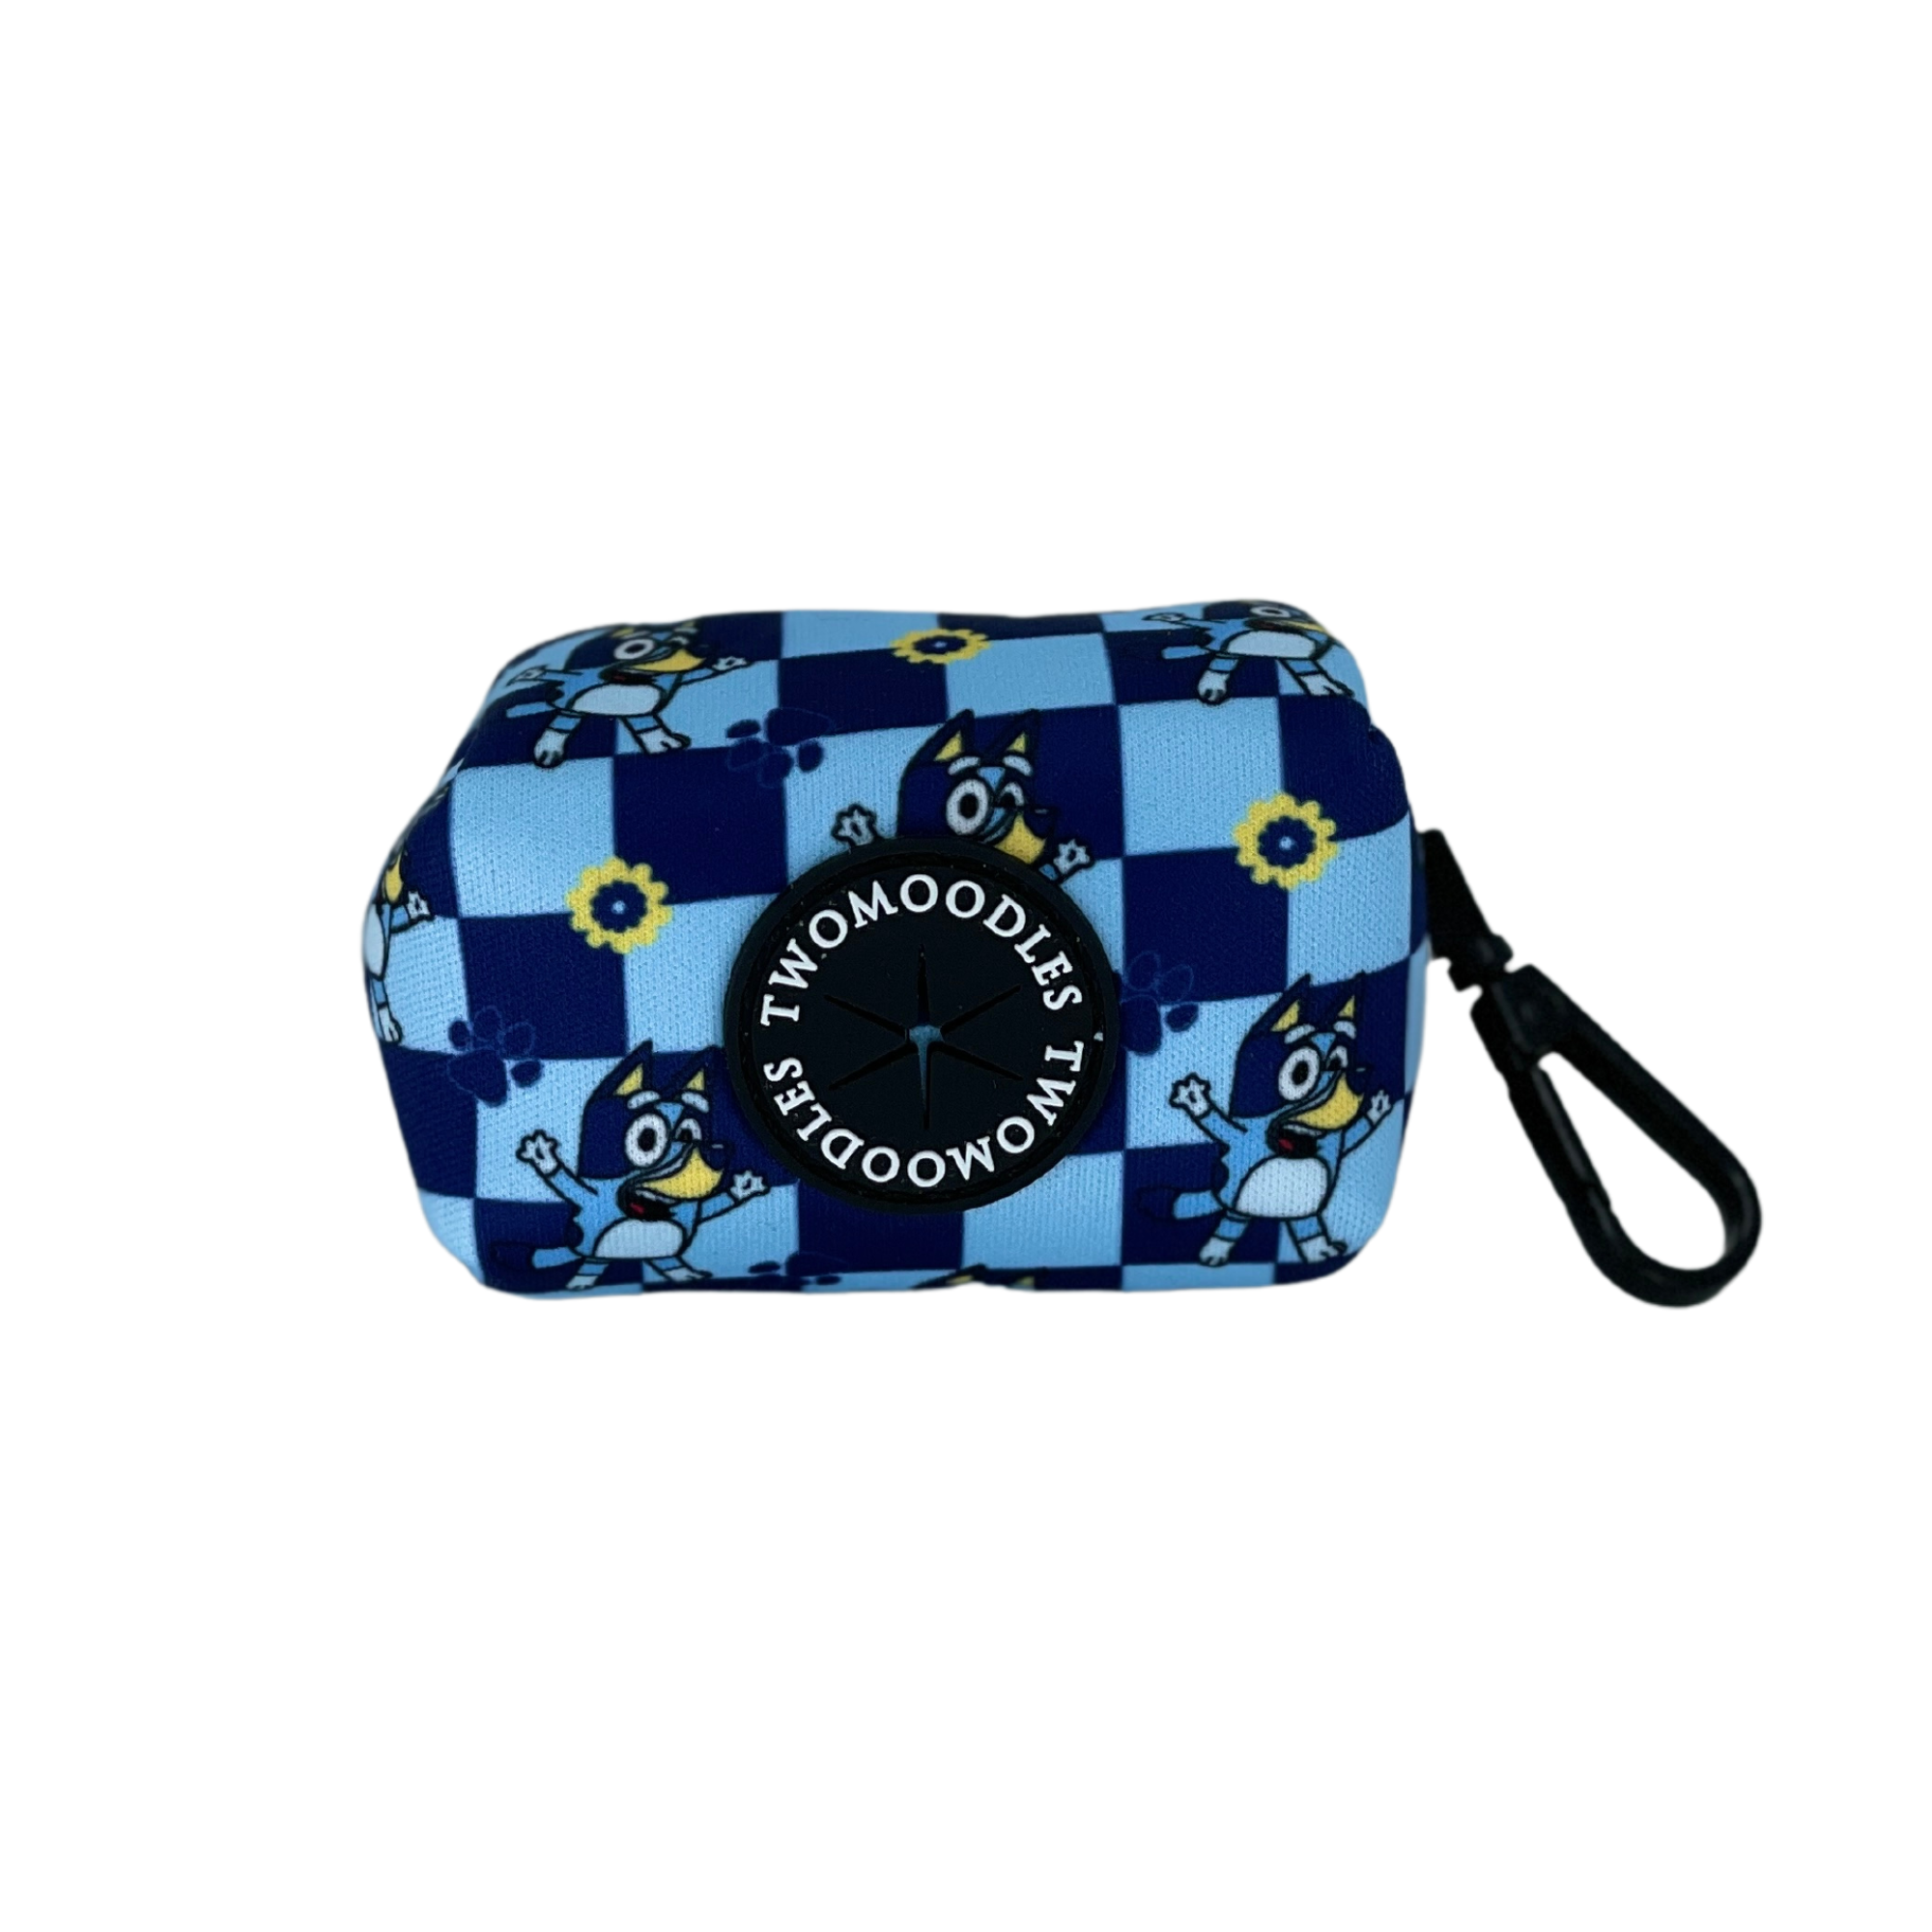 TWOMOODLES WASTE BAG COVER - TRUE BLUEY